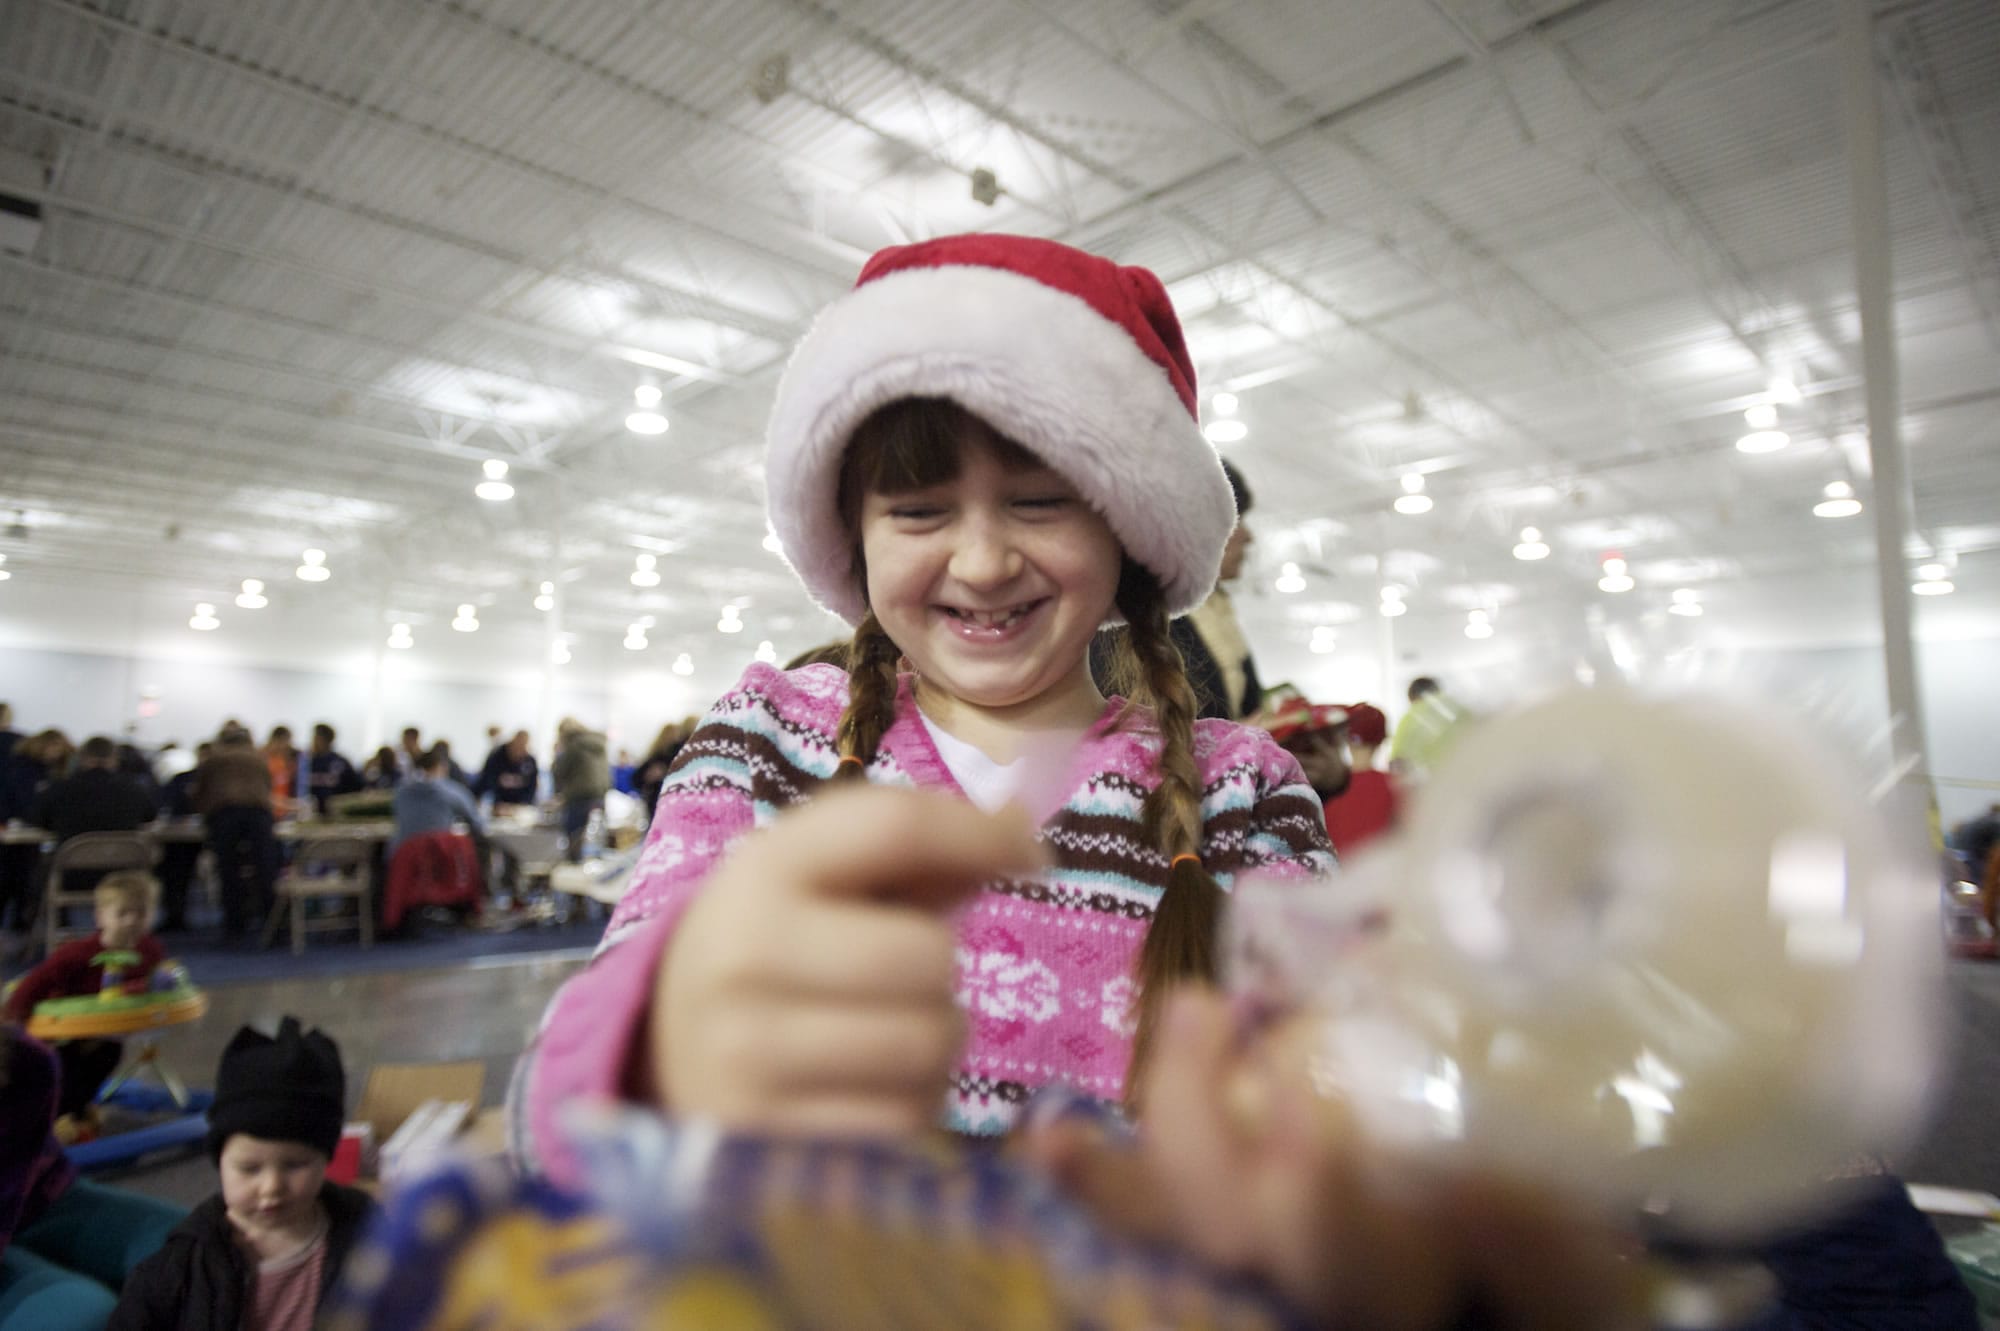 Larissa Crandall, 8, of Vancouver, wraps a donated Christmas gift for a local child.